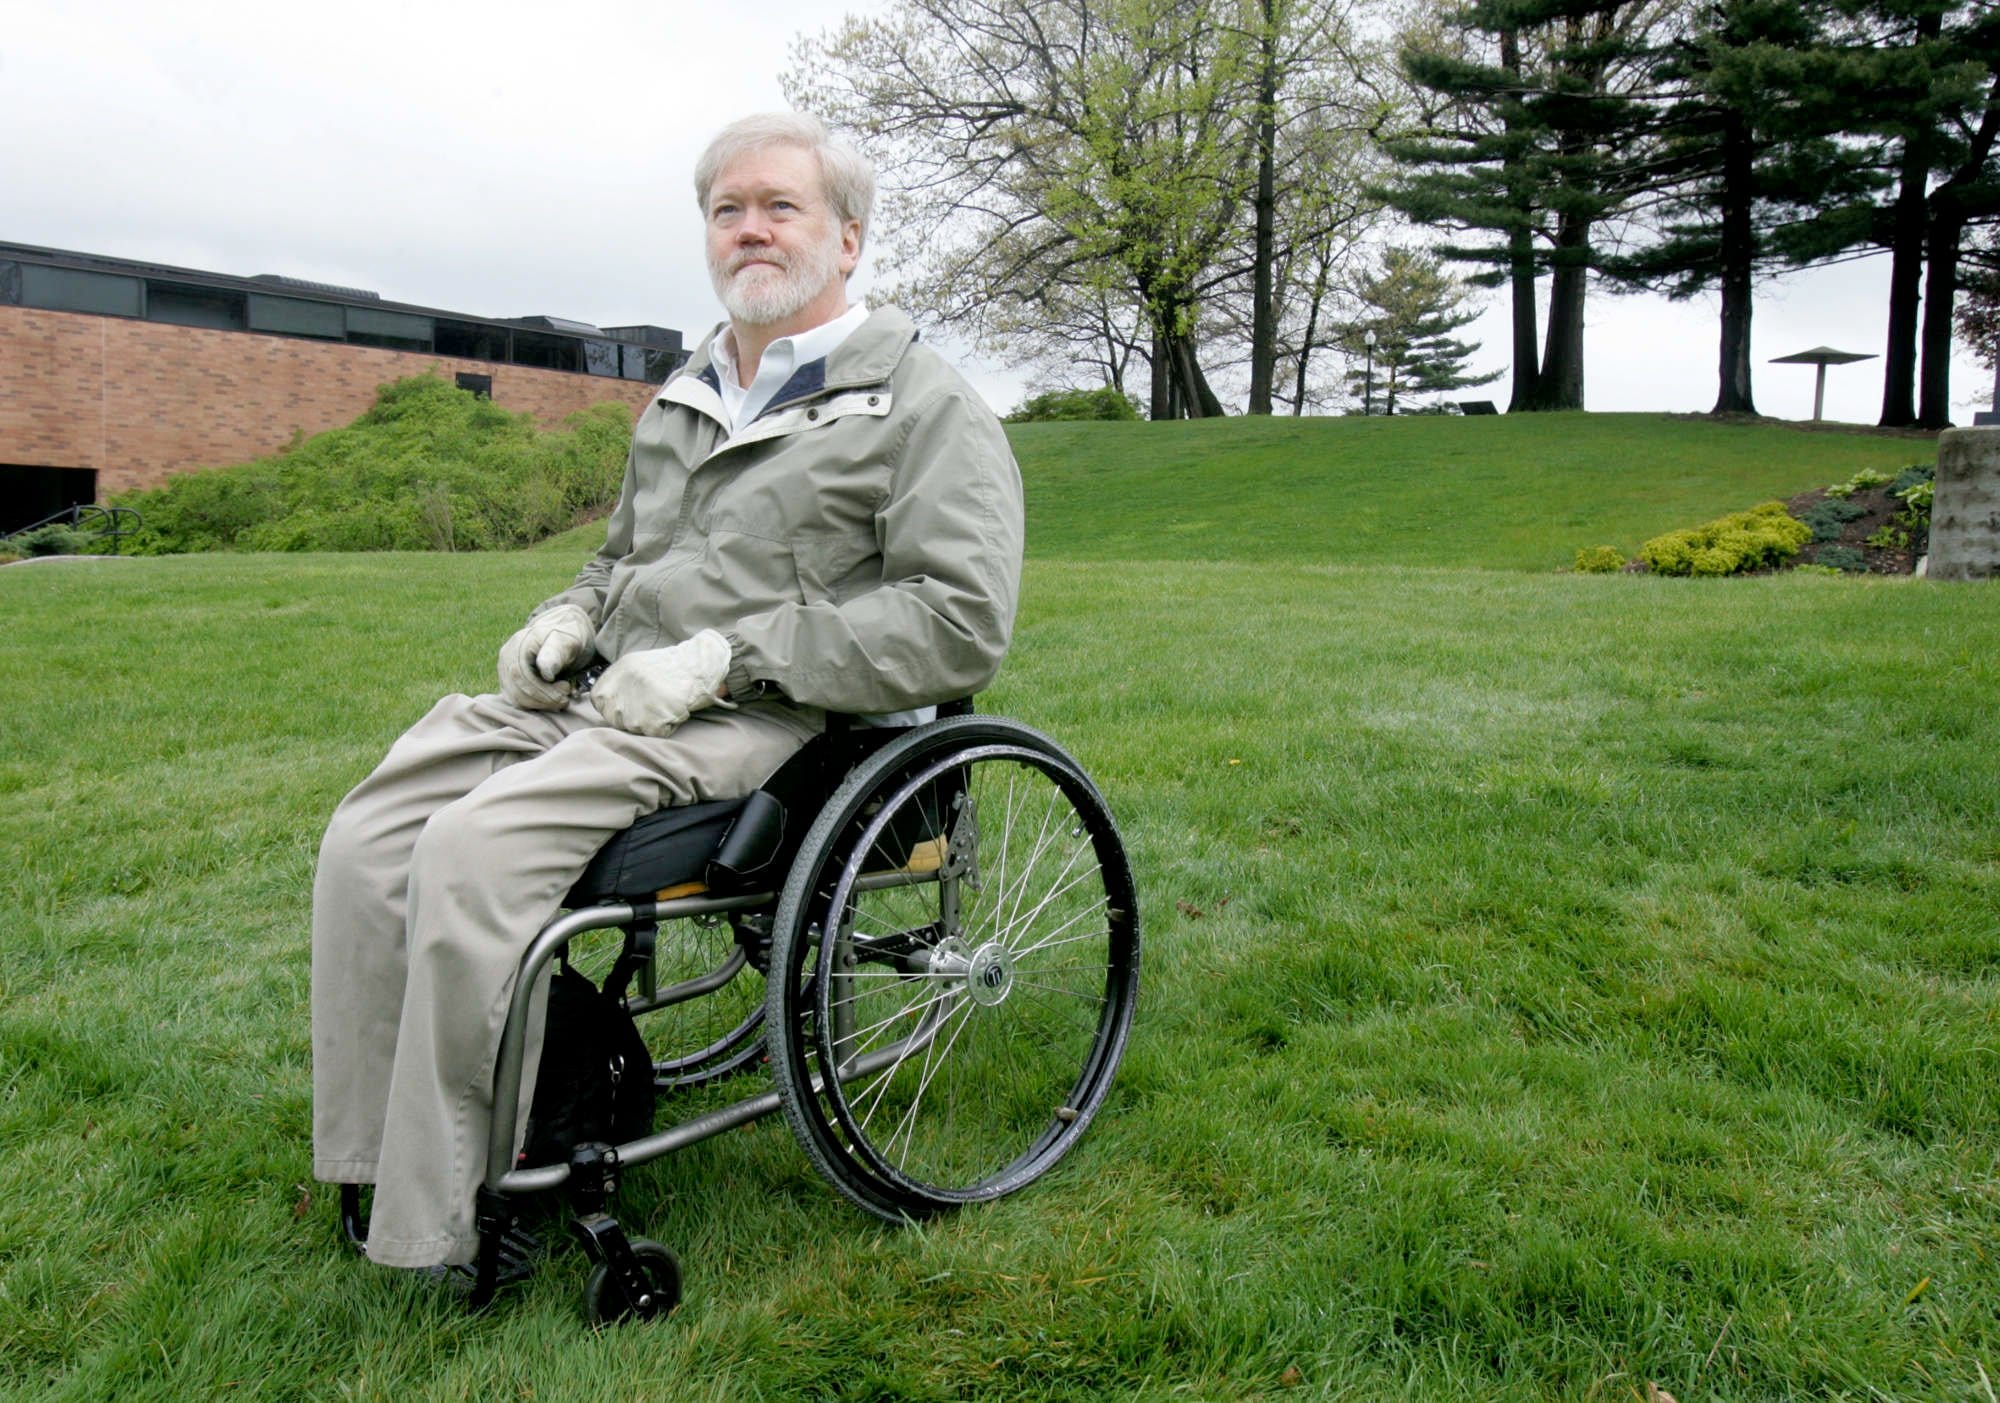 Dean Kahler recalls the May 4, 1970, shootings from the spot where he was shot and paralyzed as he talks about that day's events on the campus of Kent State University Monday, April 26, 2010, in Kent, Ohio. [KAREN SCHIELY/AKRON BEACON JOURNAL]